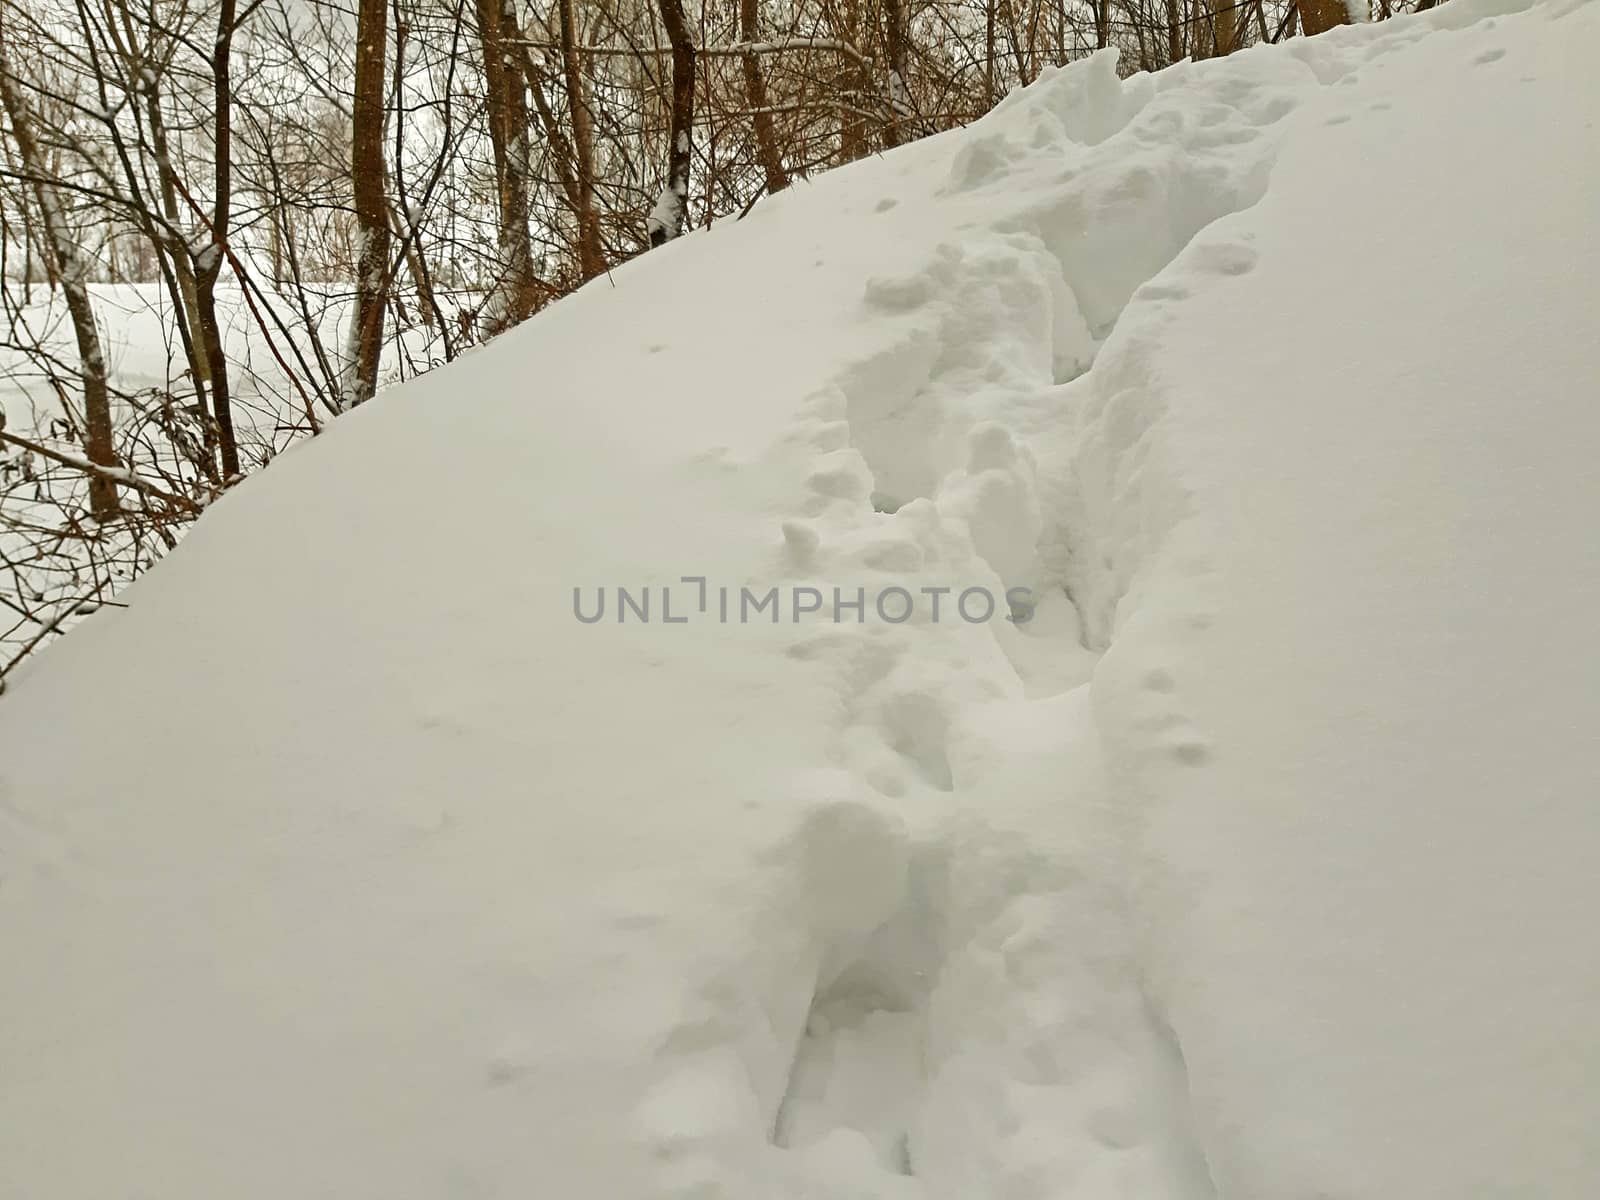 Deep Human footprints in the snow, winter by Mindru